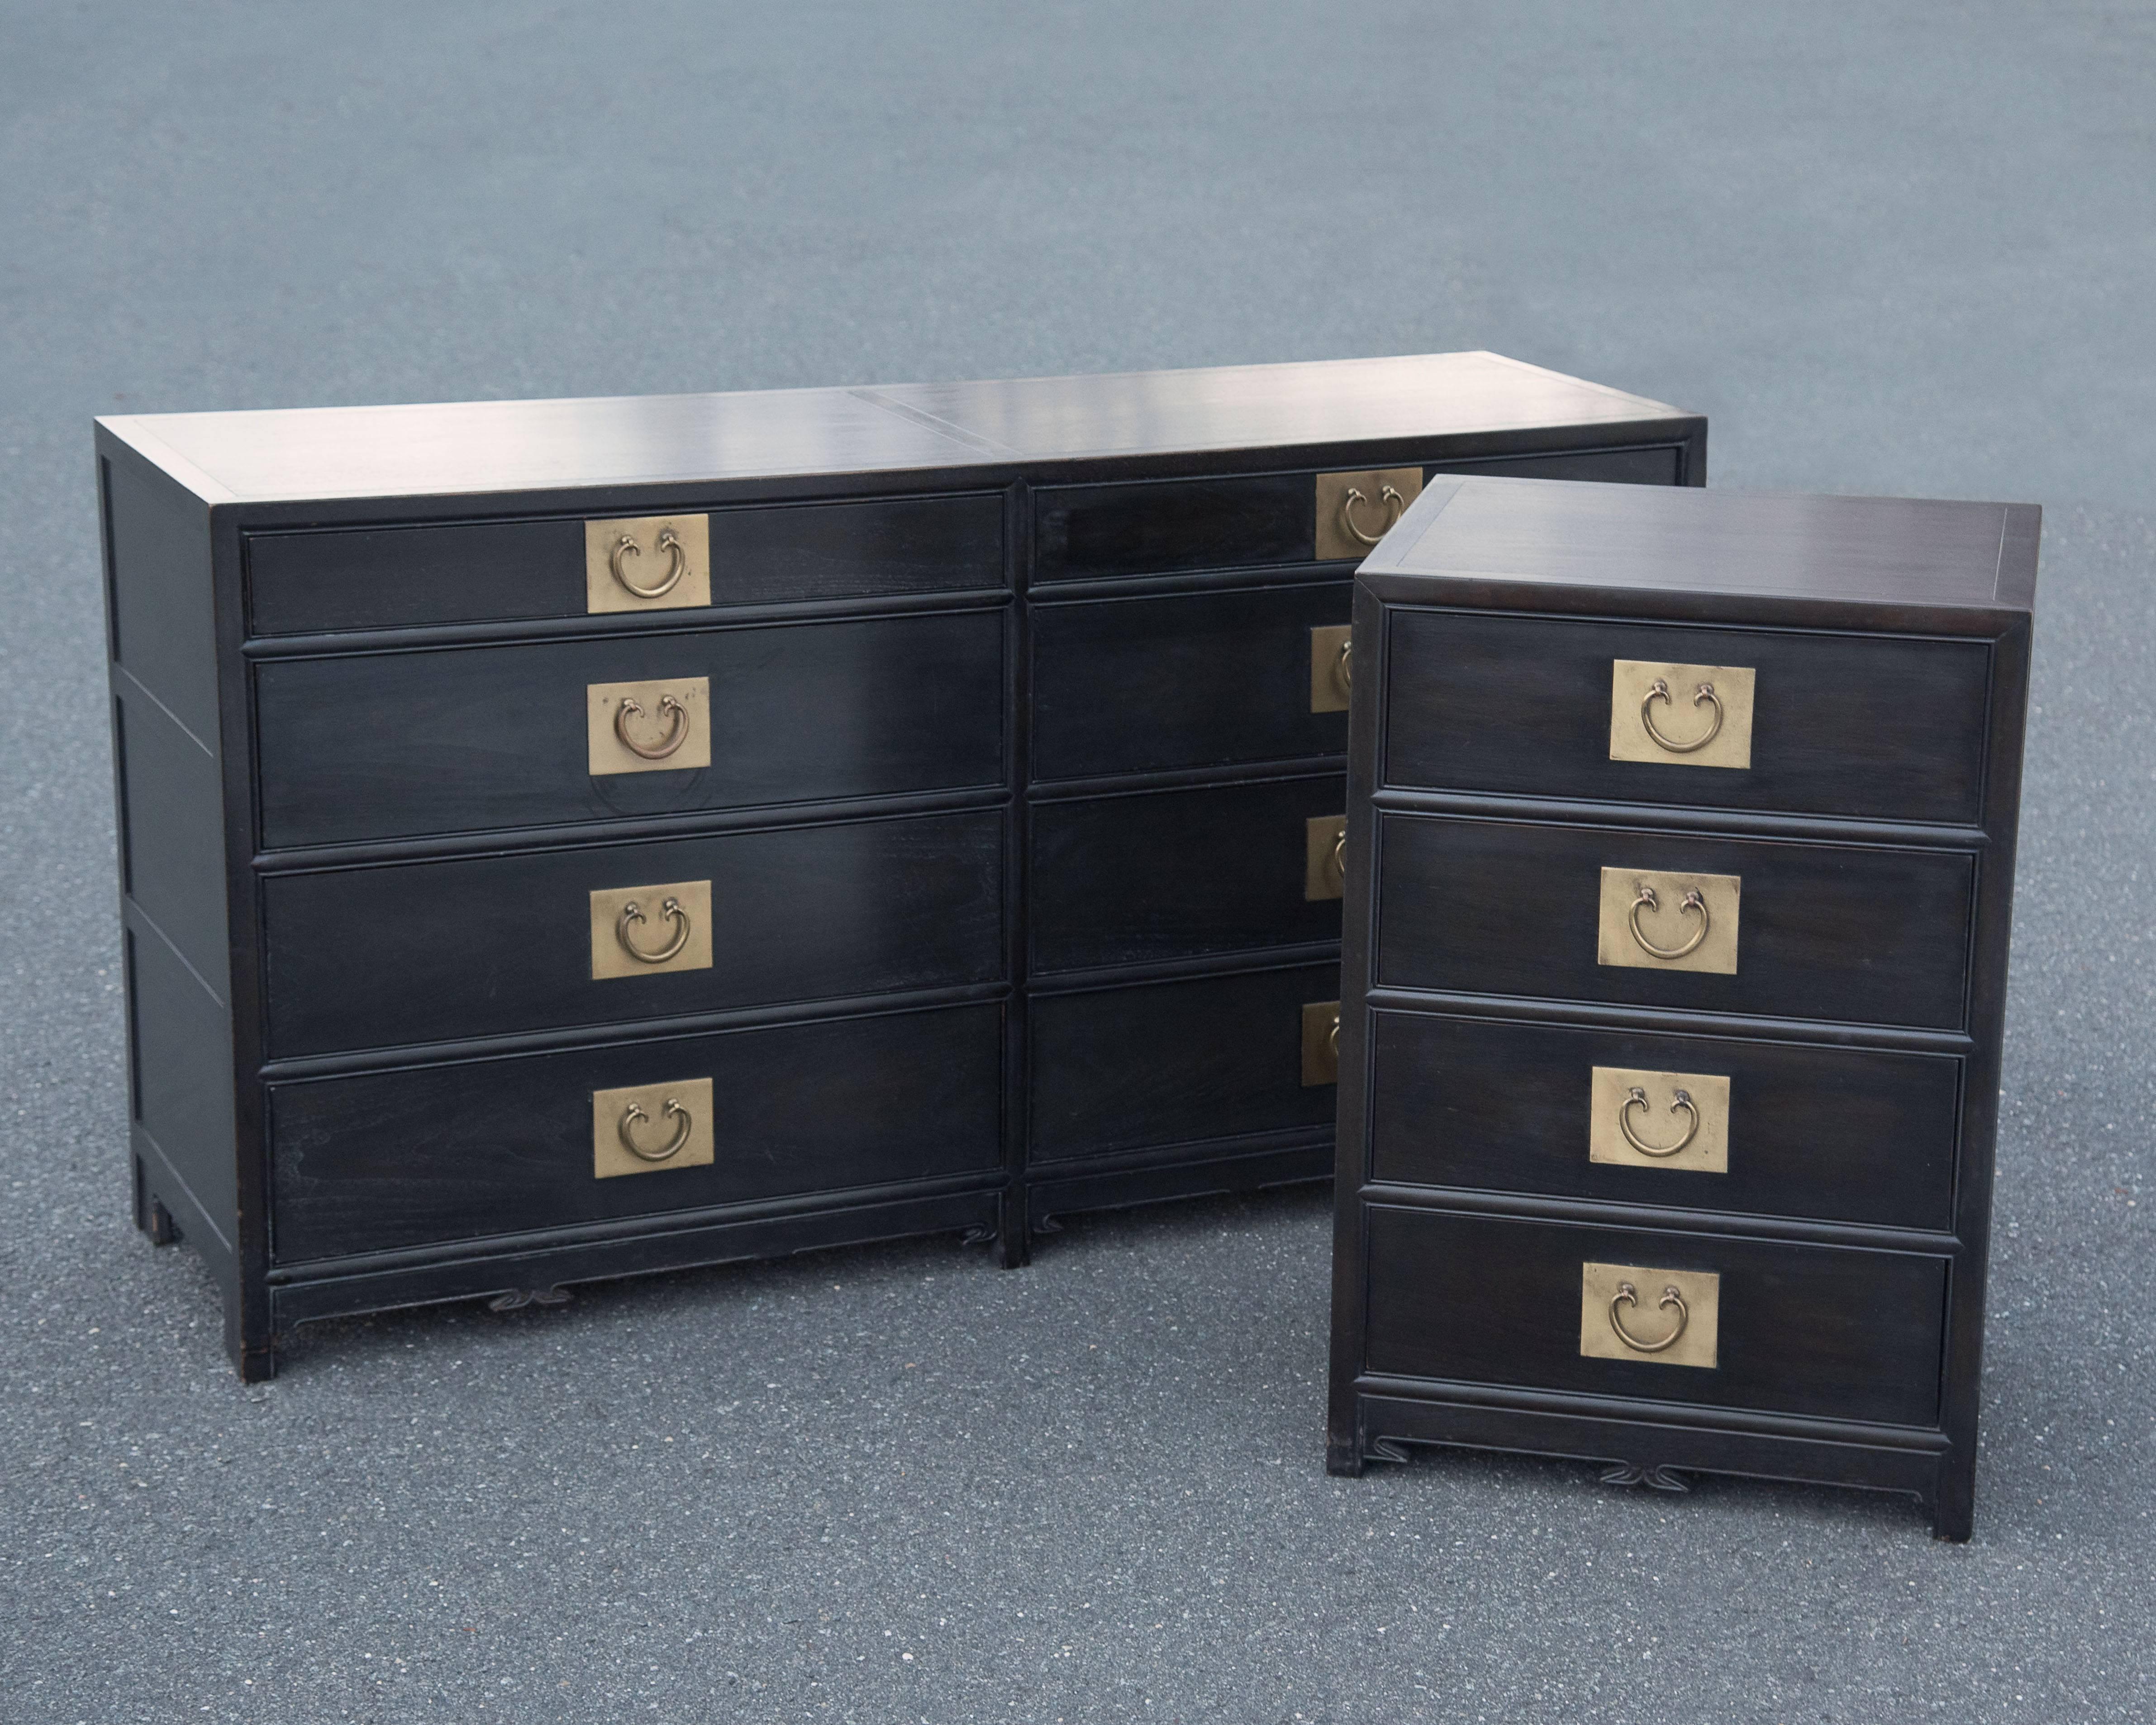 A beautiful eight-drawer dresser by Michael Taylor for Baker with handsome Dorothy Draper style brass hardware, not original to the pieces. Retains label from the maker on inside of drawer.   Large dresser is 60W 32 H 19 D
Matching smaller side